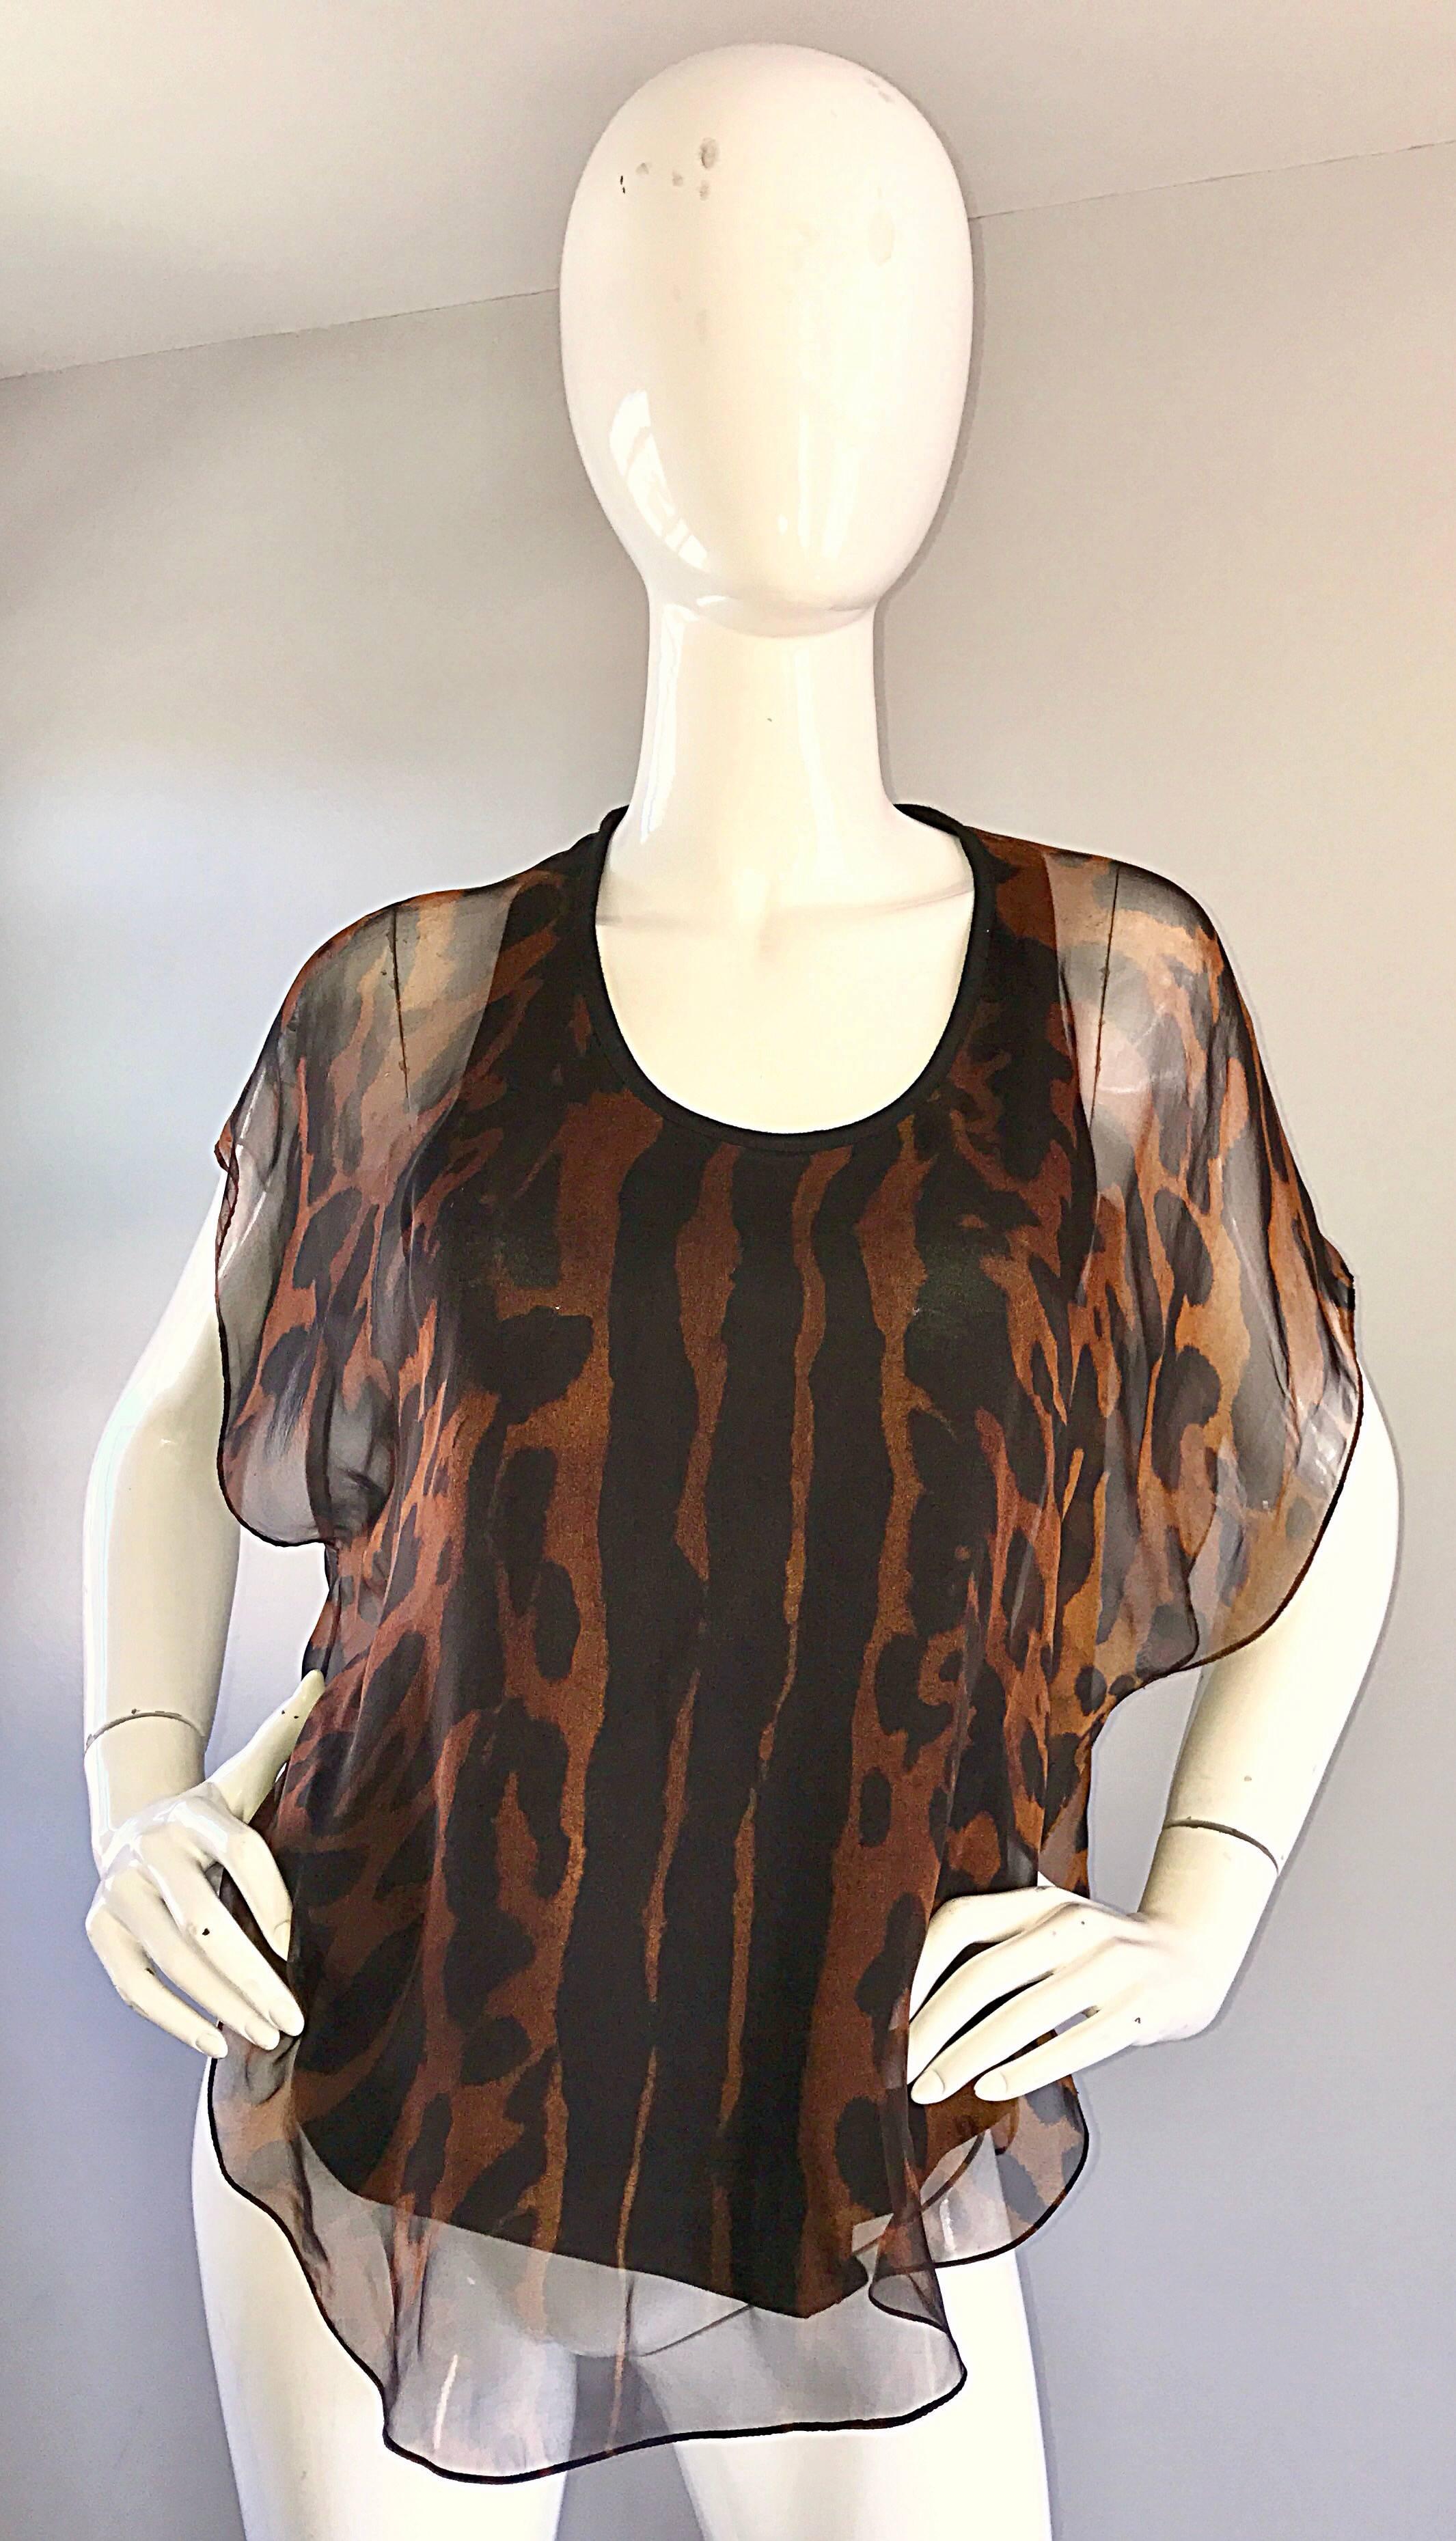 Amazing and rare early 2000s ALEXANDER MCQUEEN Pre-Death silk chiffon leopard / cheetah print top! Features a luxurious silk chiffon over a black cotton racerback top. Flutter sleeves look amazing on! Simply slips over the head. Chic, comfortable